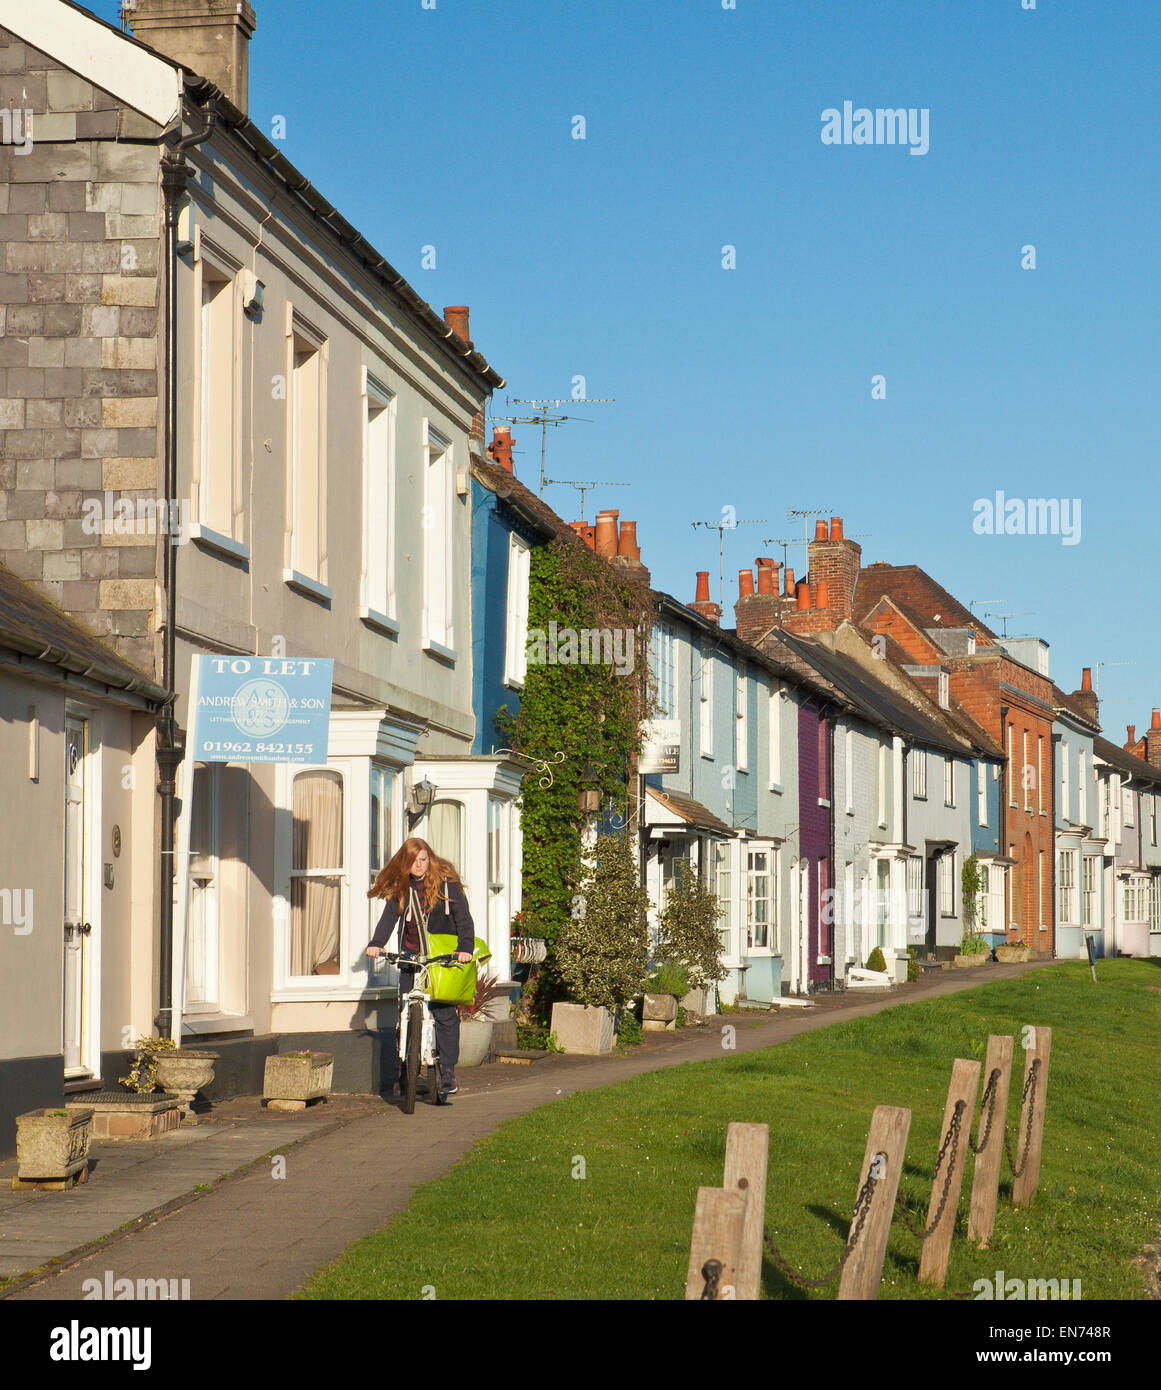 Girl on her paper delivery round. Stock Photo